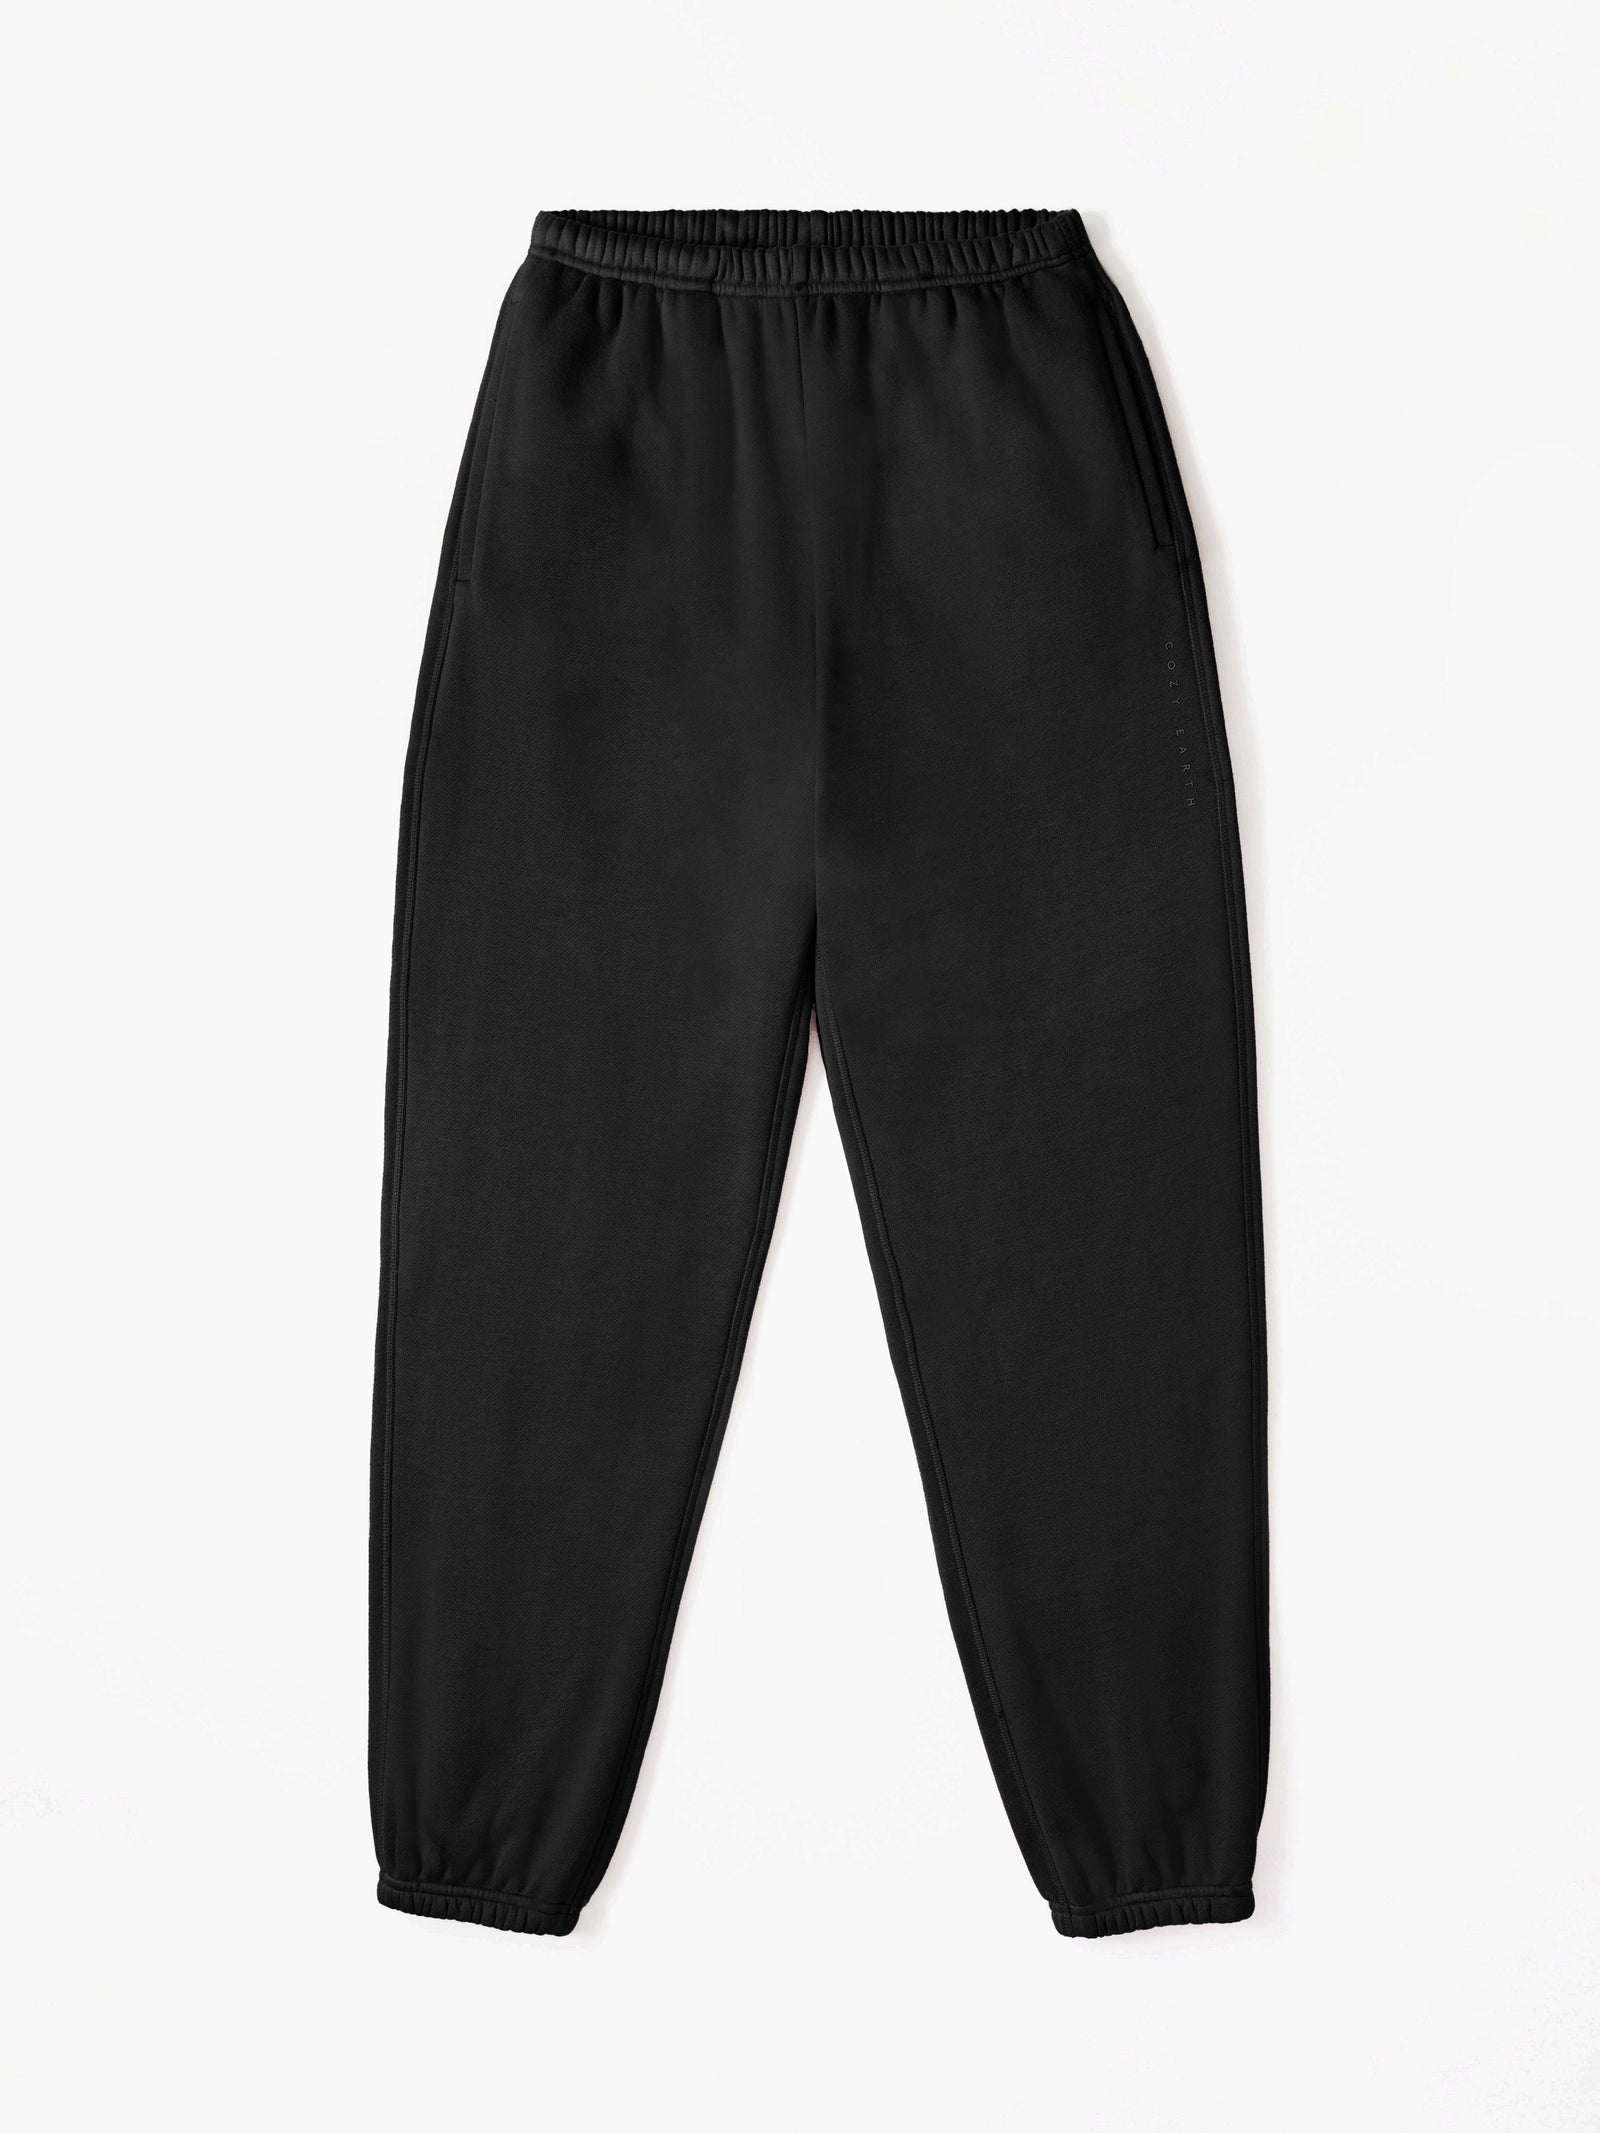 Black CityScape Joggers. The Joggers are laying flat over a white background. 